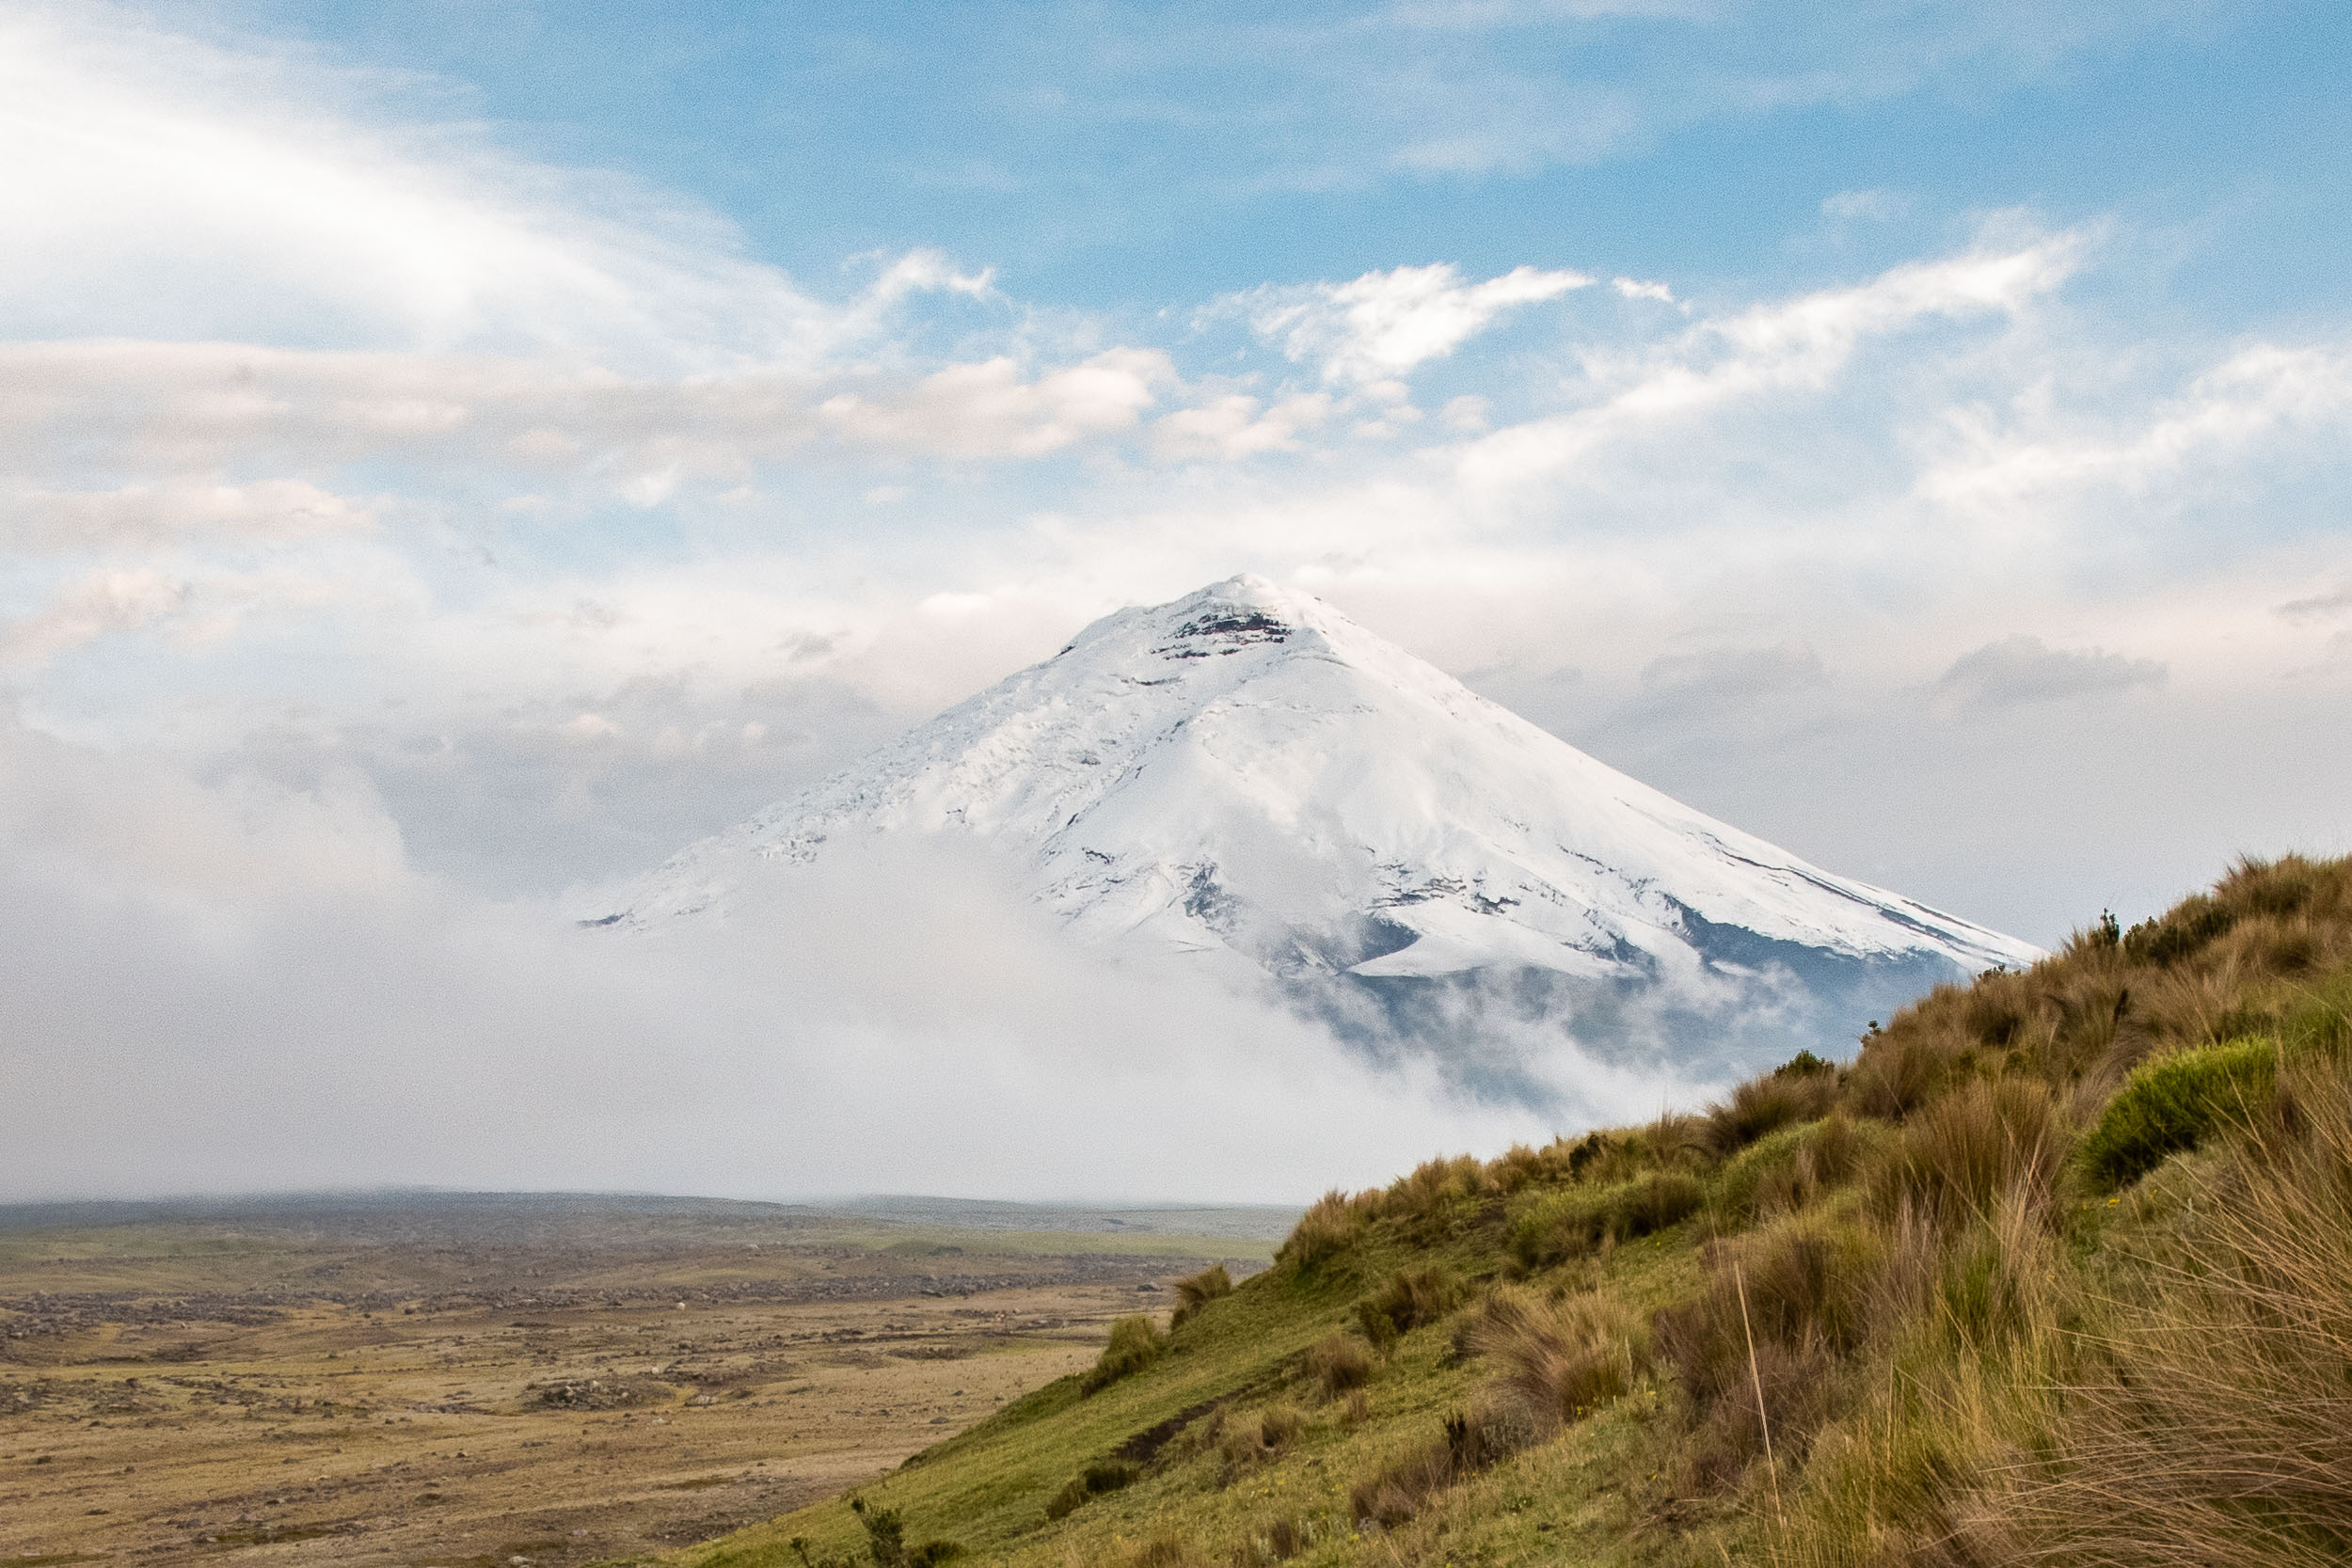 Into the shadow of the giant in Cotopaxi National Park